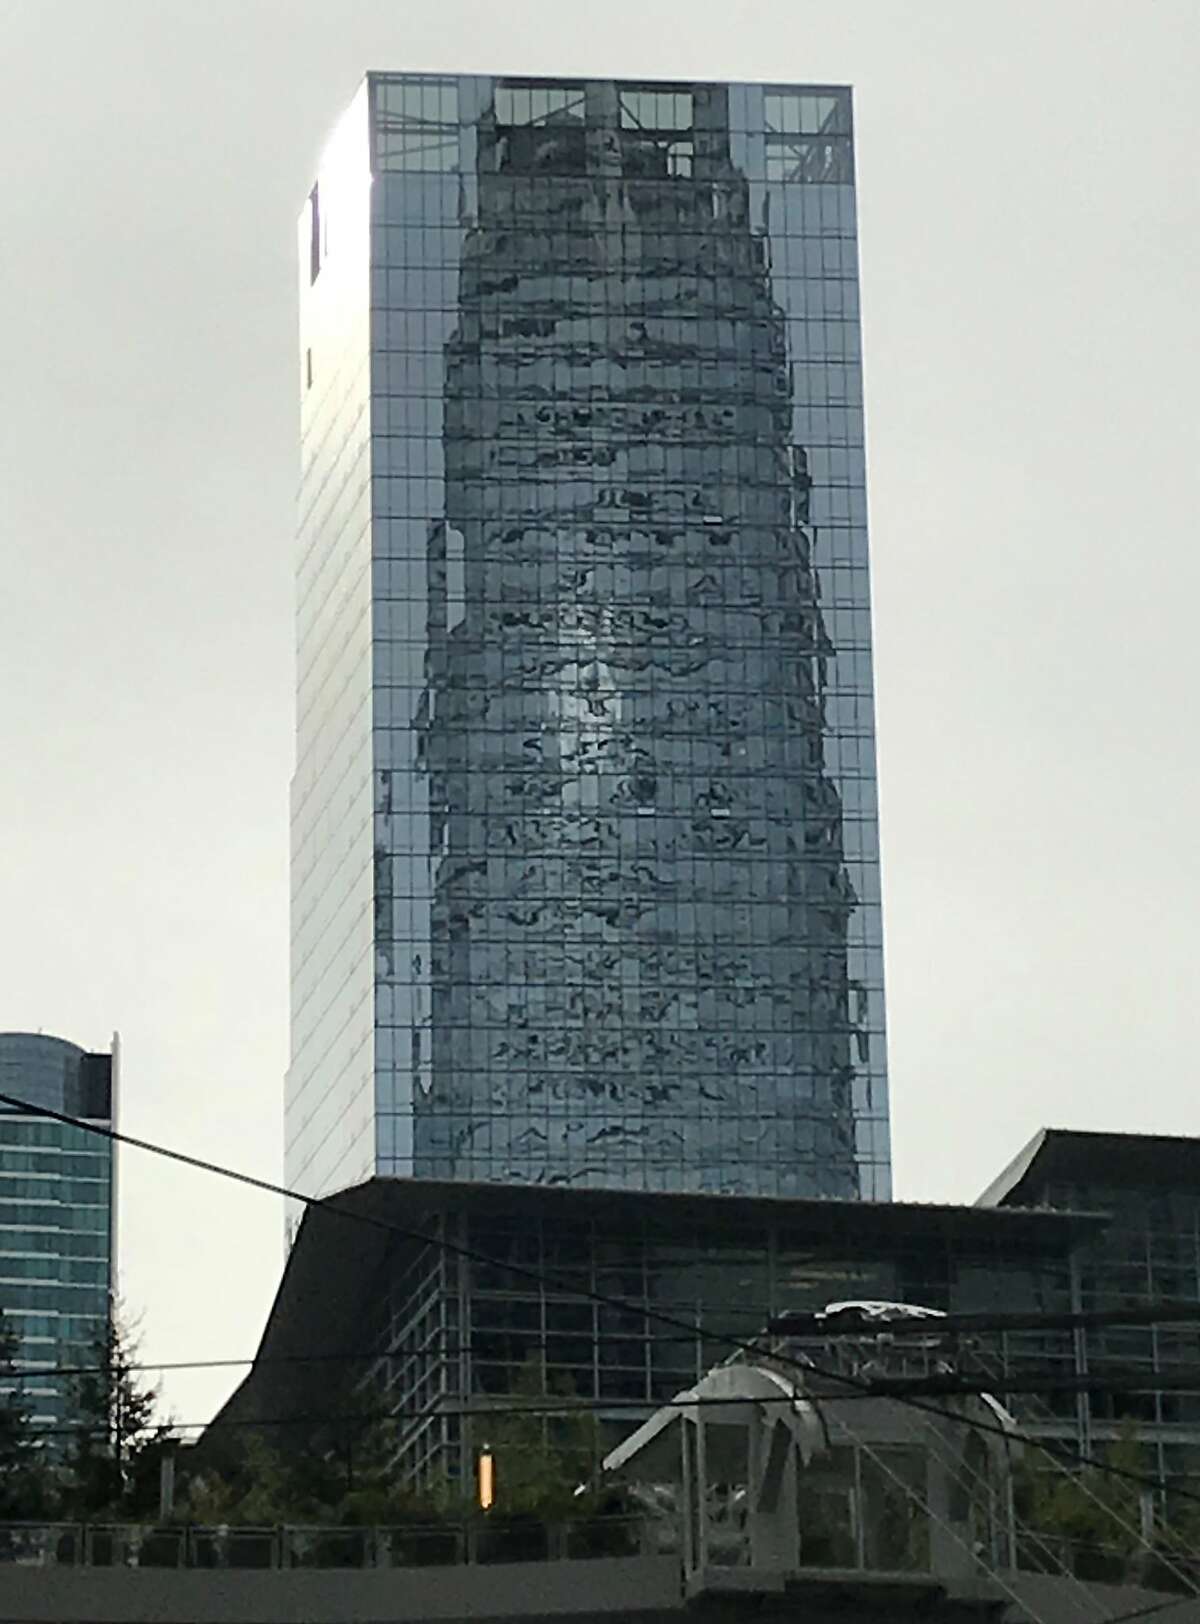 The Avery as seen from Mission Street on March 1, 2019, reflecting nearby Salesforce Tower.